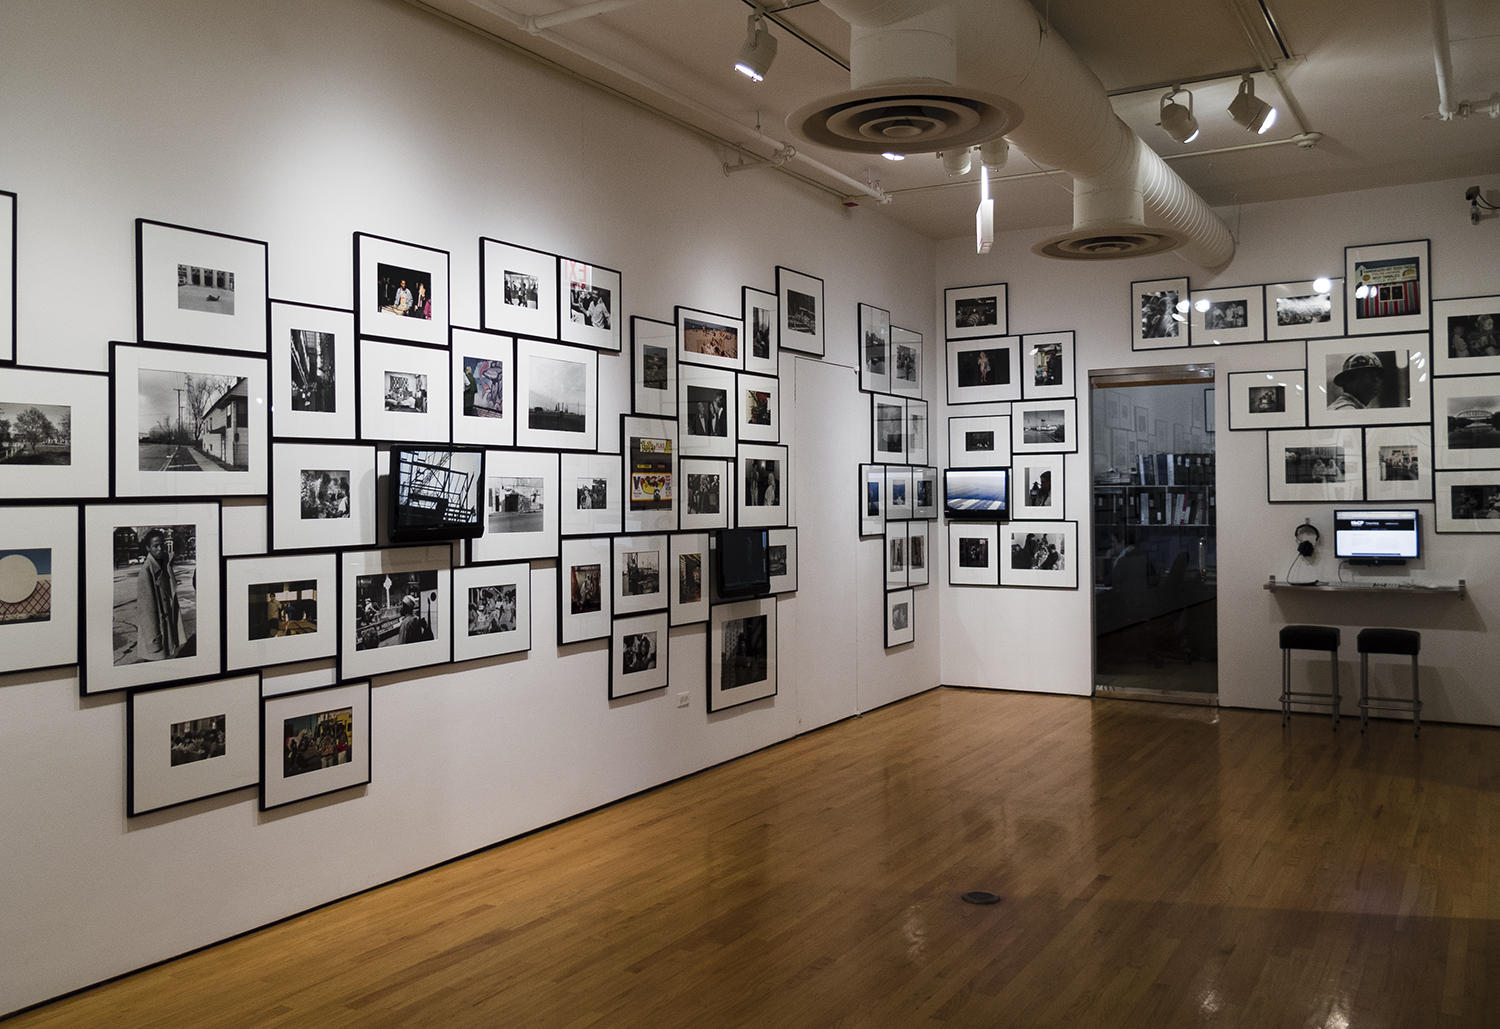 Jan Tichy, Installation view of 1979:1-2012:21 Jan Tichy Works with the MoCP Collection, Print Studio Room with images from Changing Chicago Project and videos by Tichy, Museum of Contemporary Photography, Chicago. Image courtesy of the artist and the MoCP.